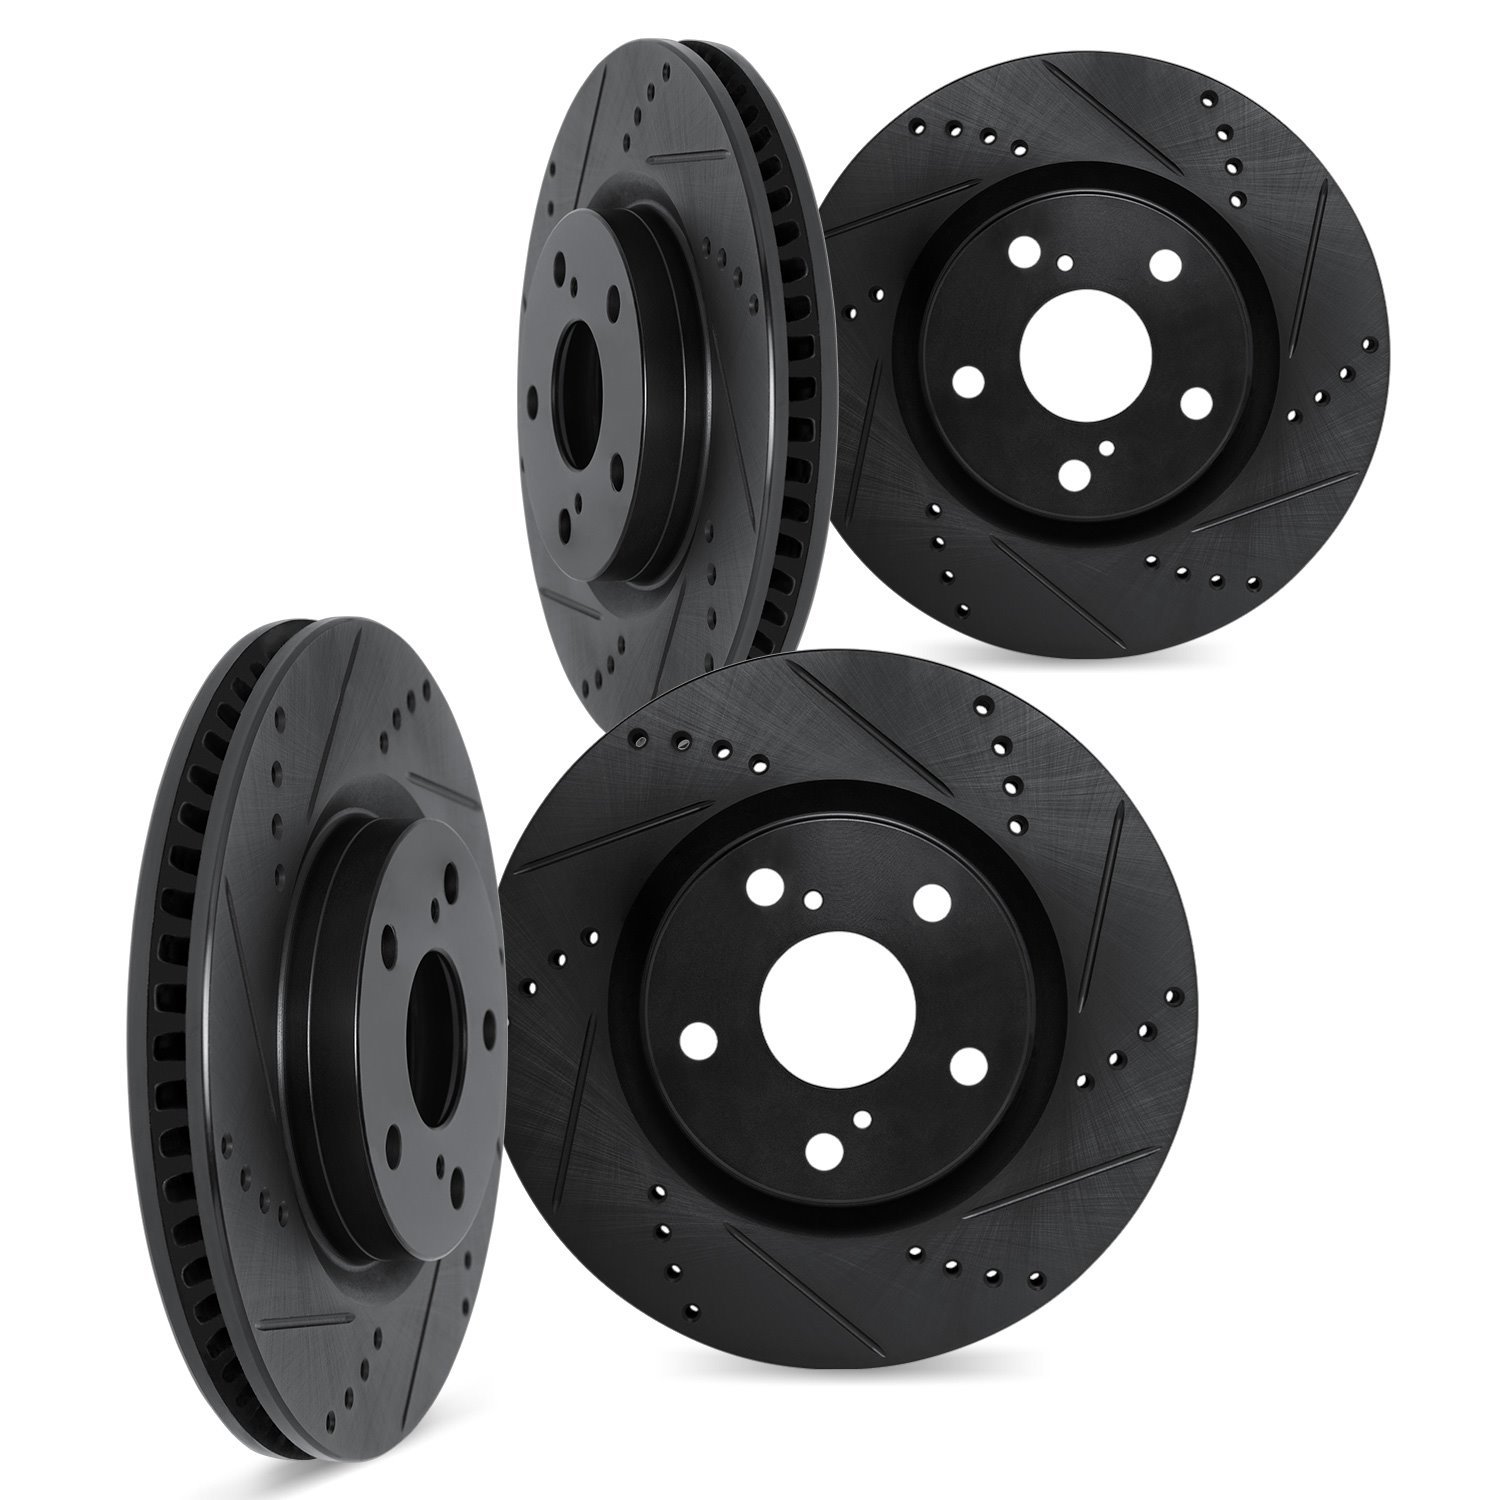 8004-45052 Drilled/Slotted Brake Rotors [Black], Fits Select GM, Position: Front and Rear